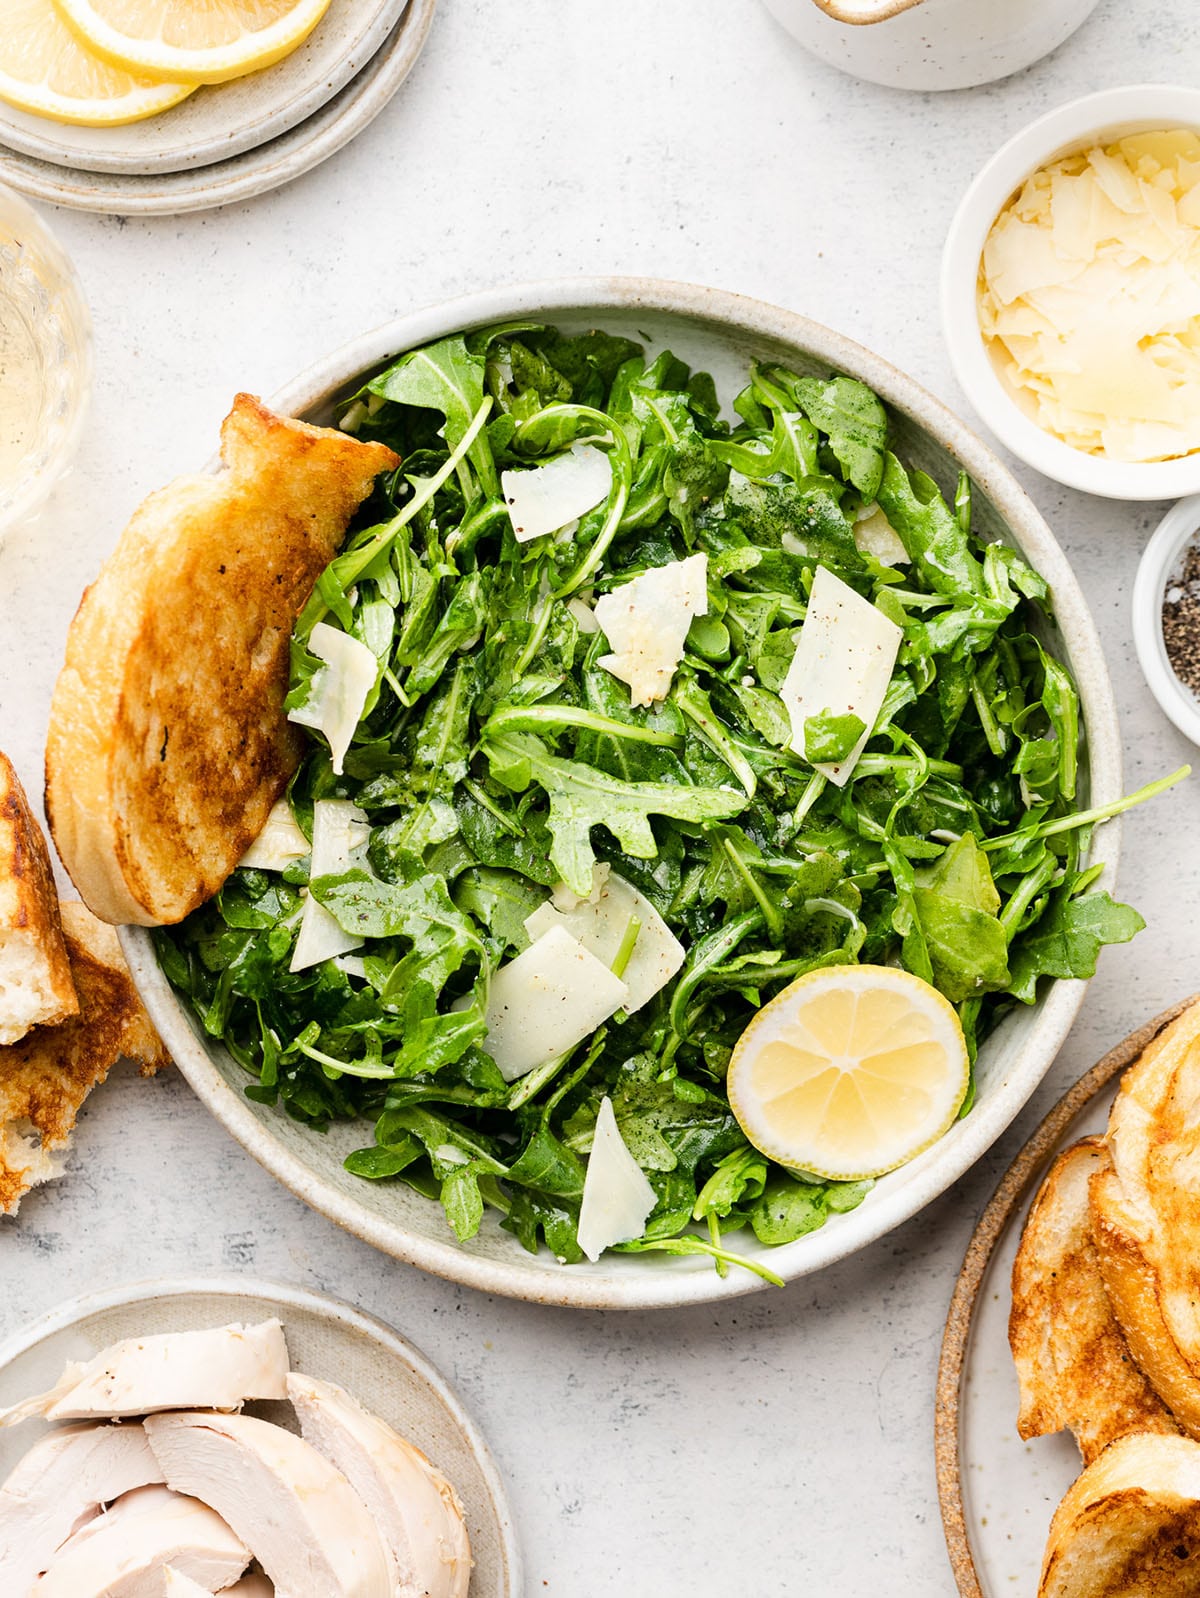 Overhead view of arugula salad in a white bowl, with toasted bread and lemon slices on the side.